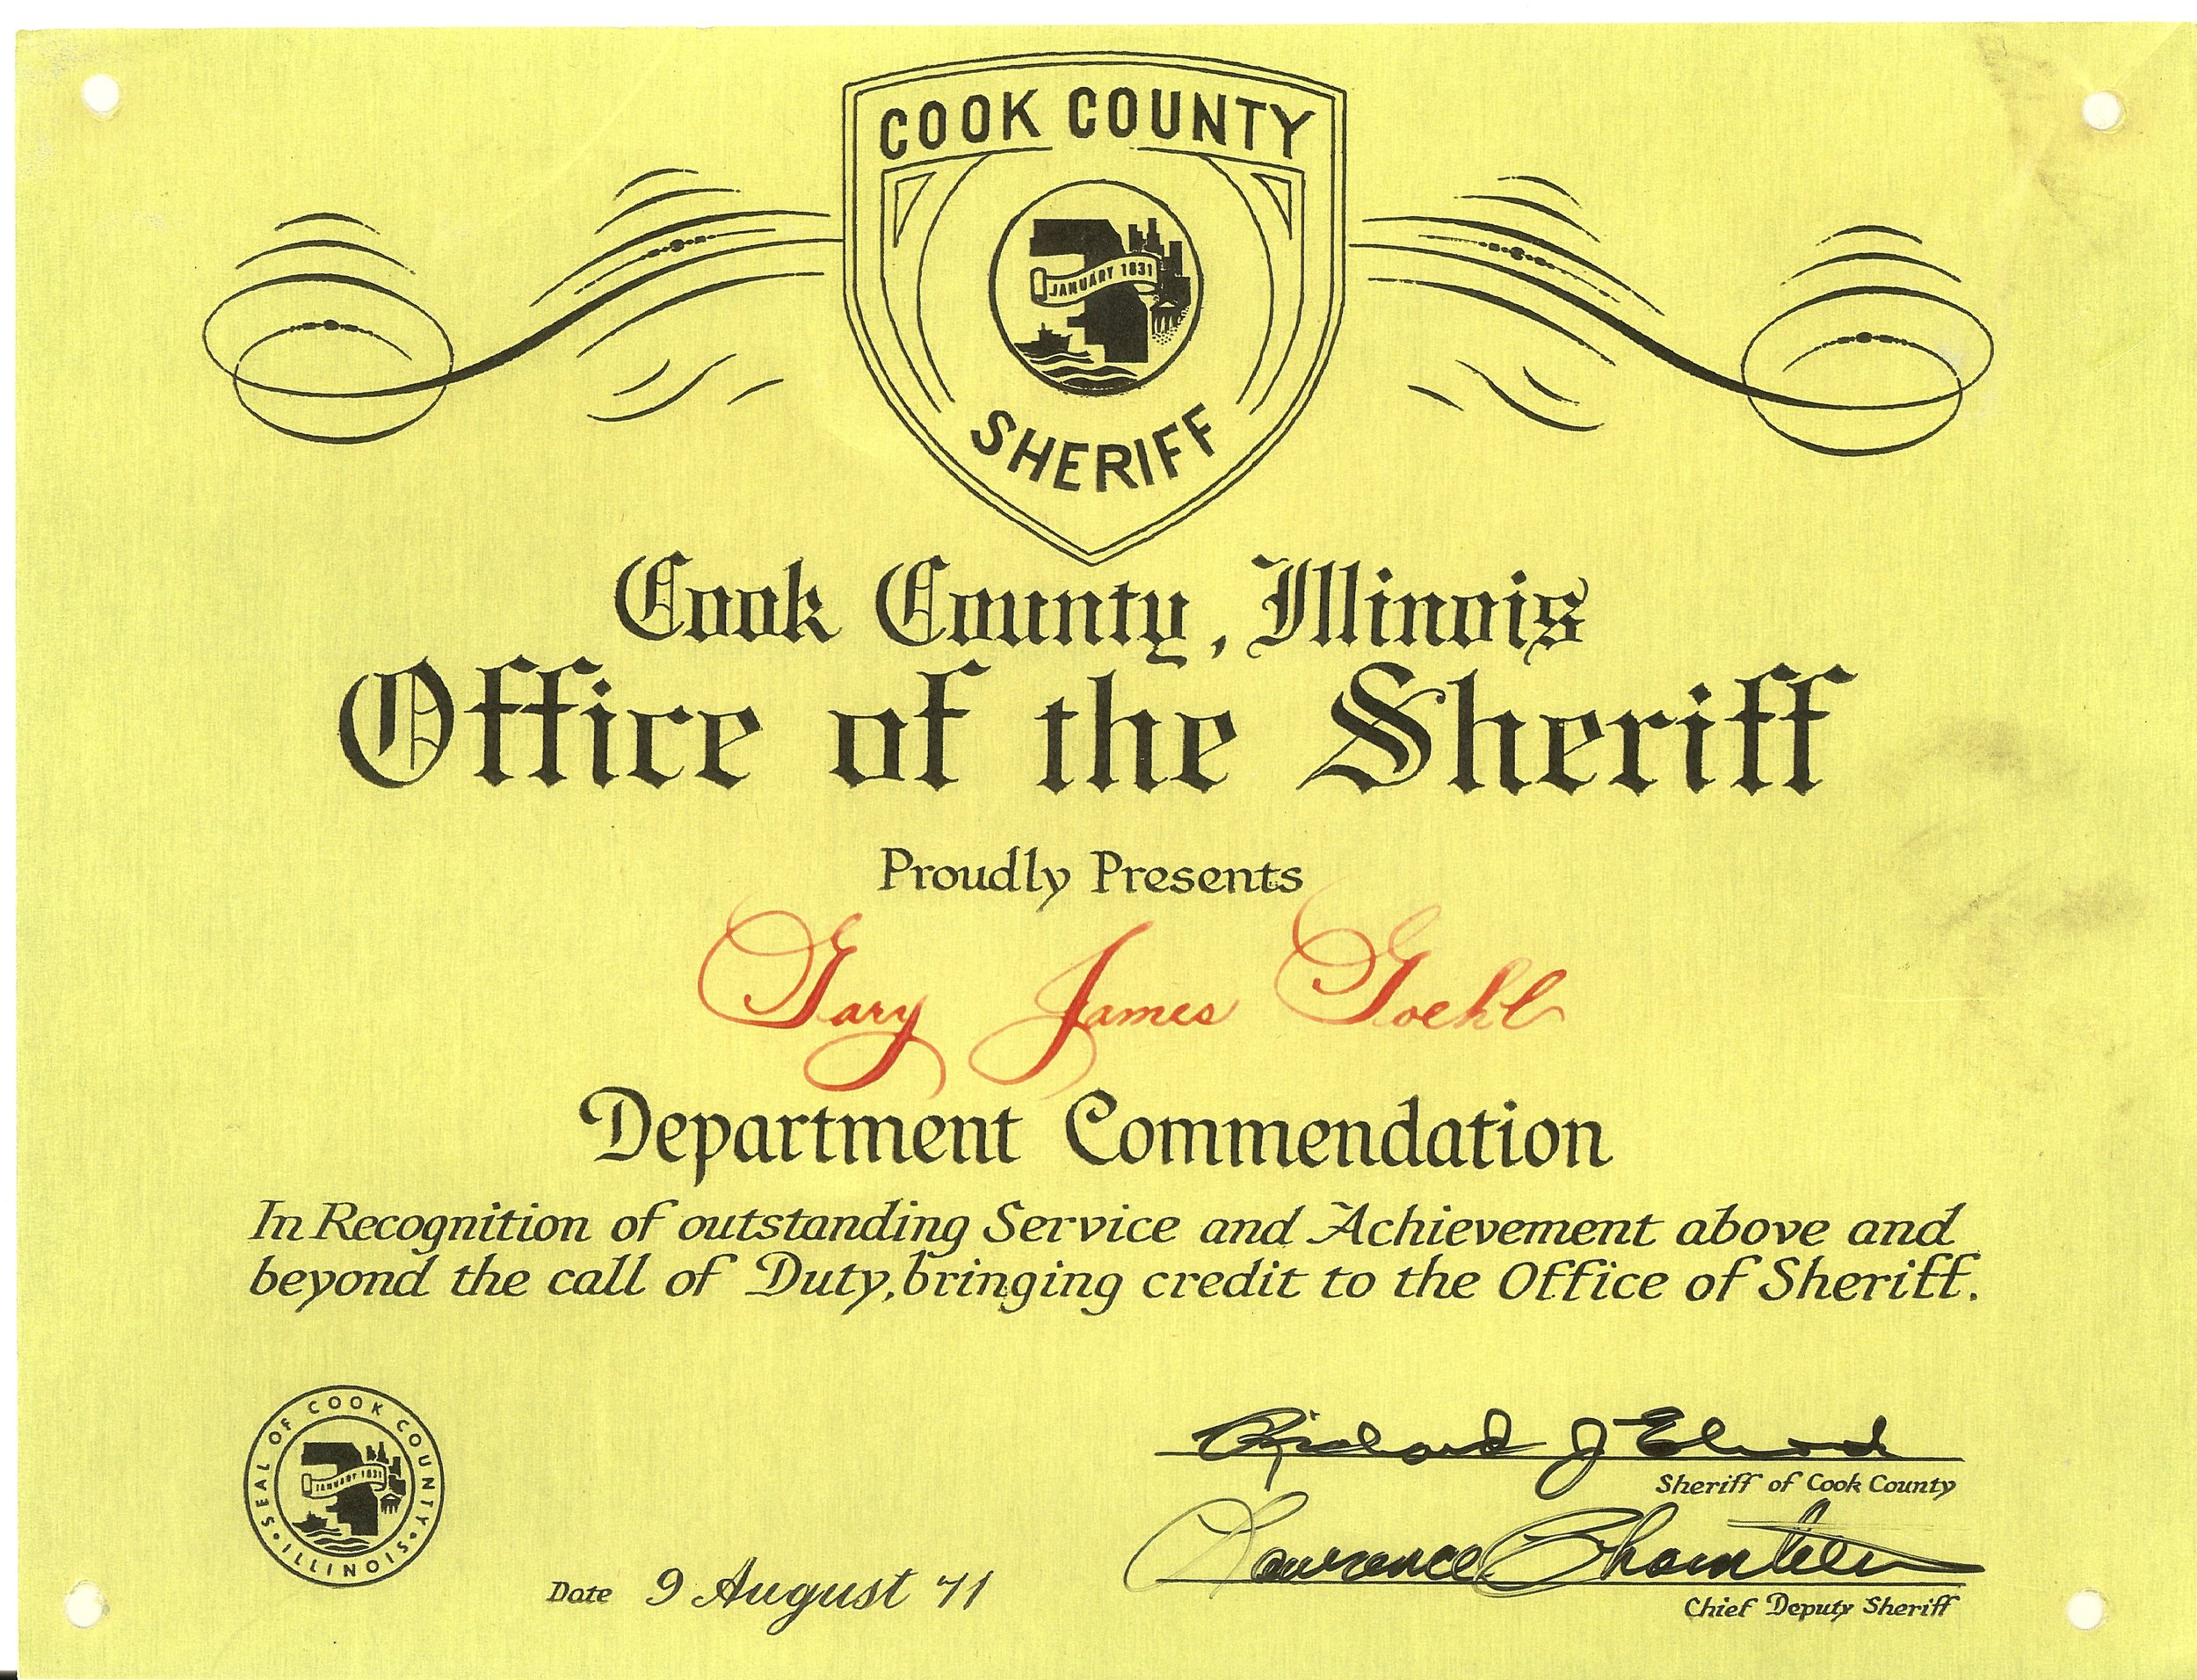 Goehl's Sheriff's Department Commendation